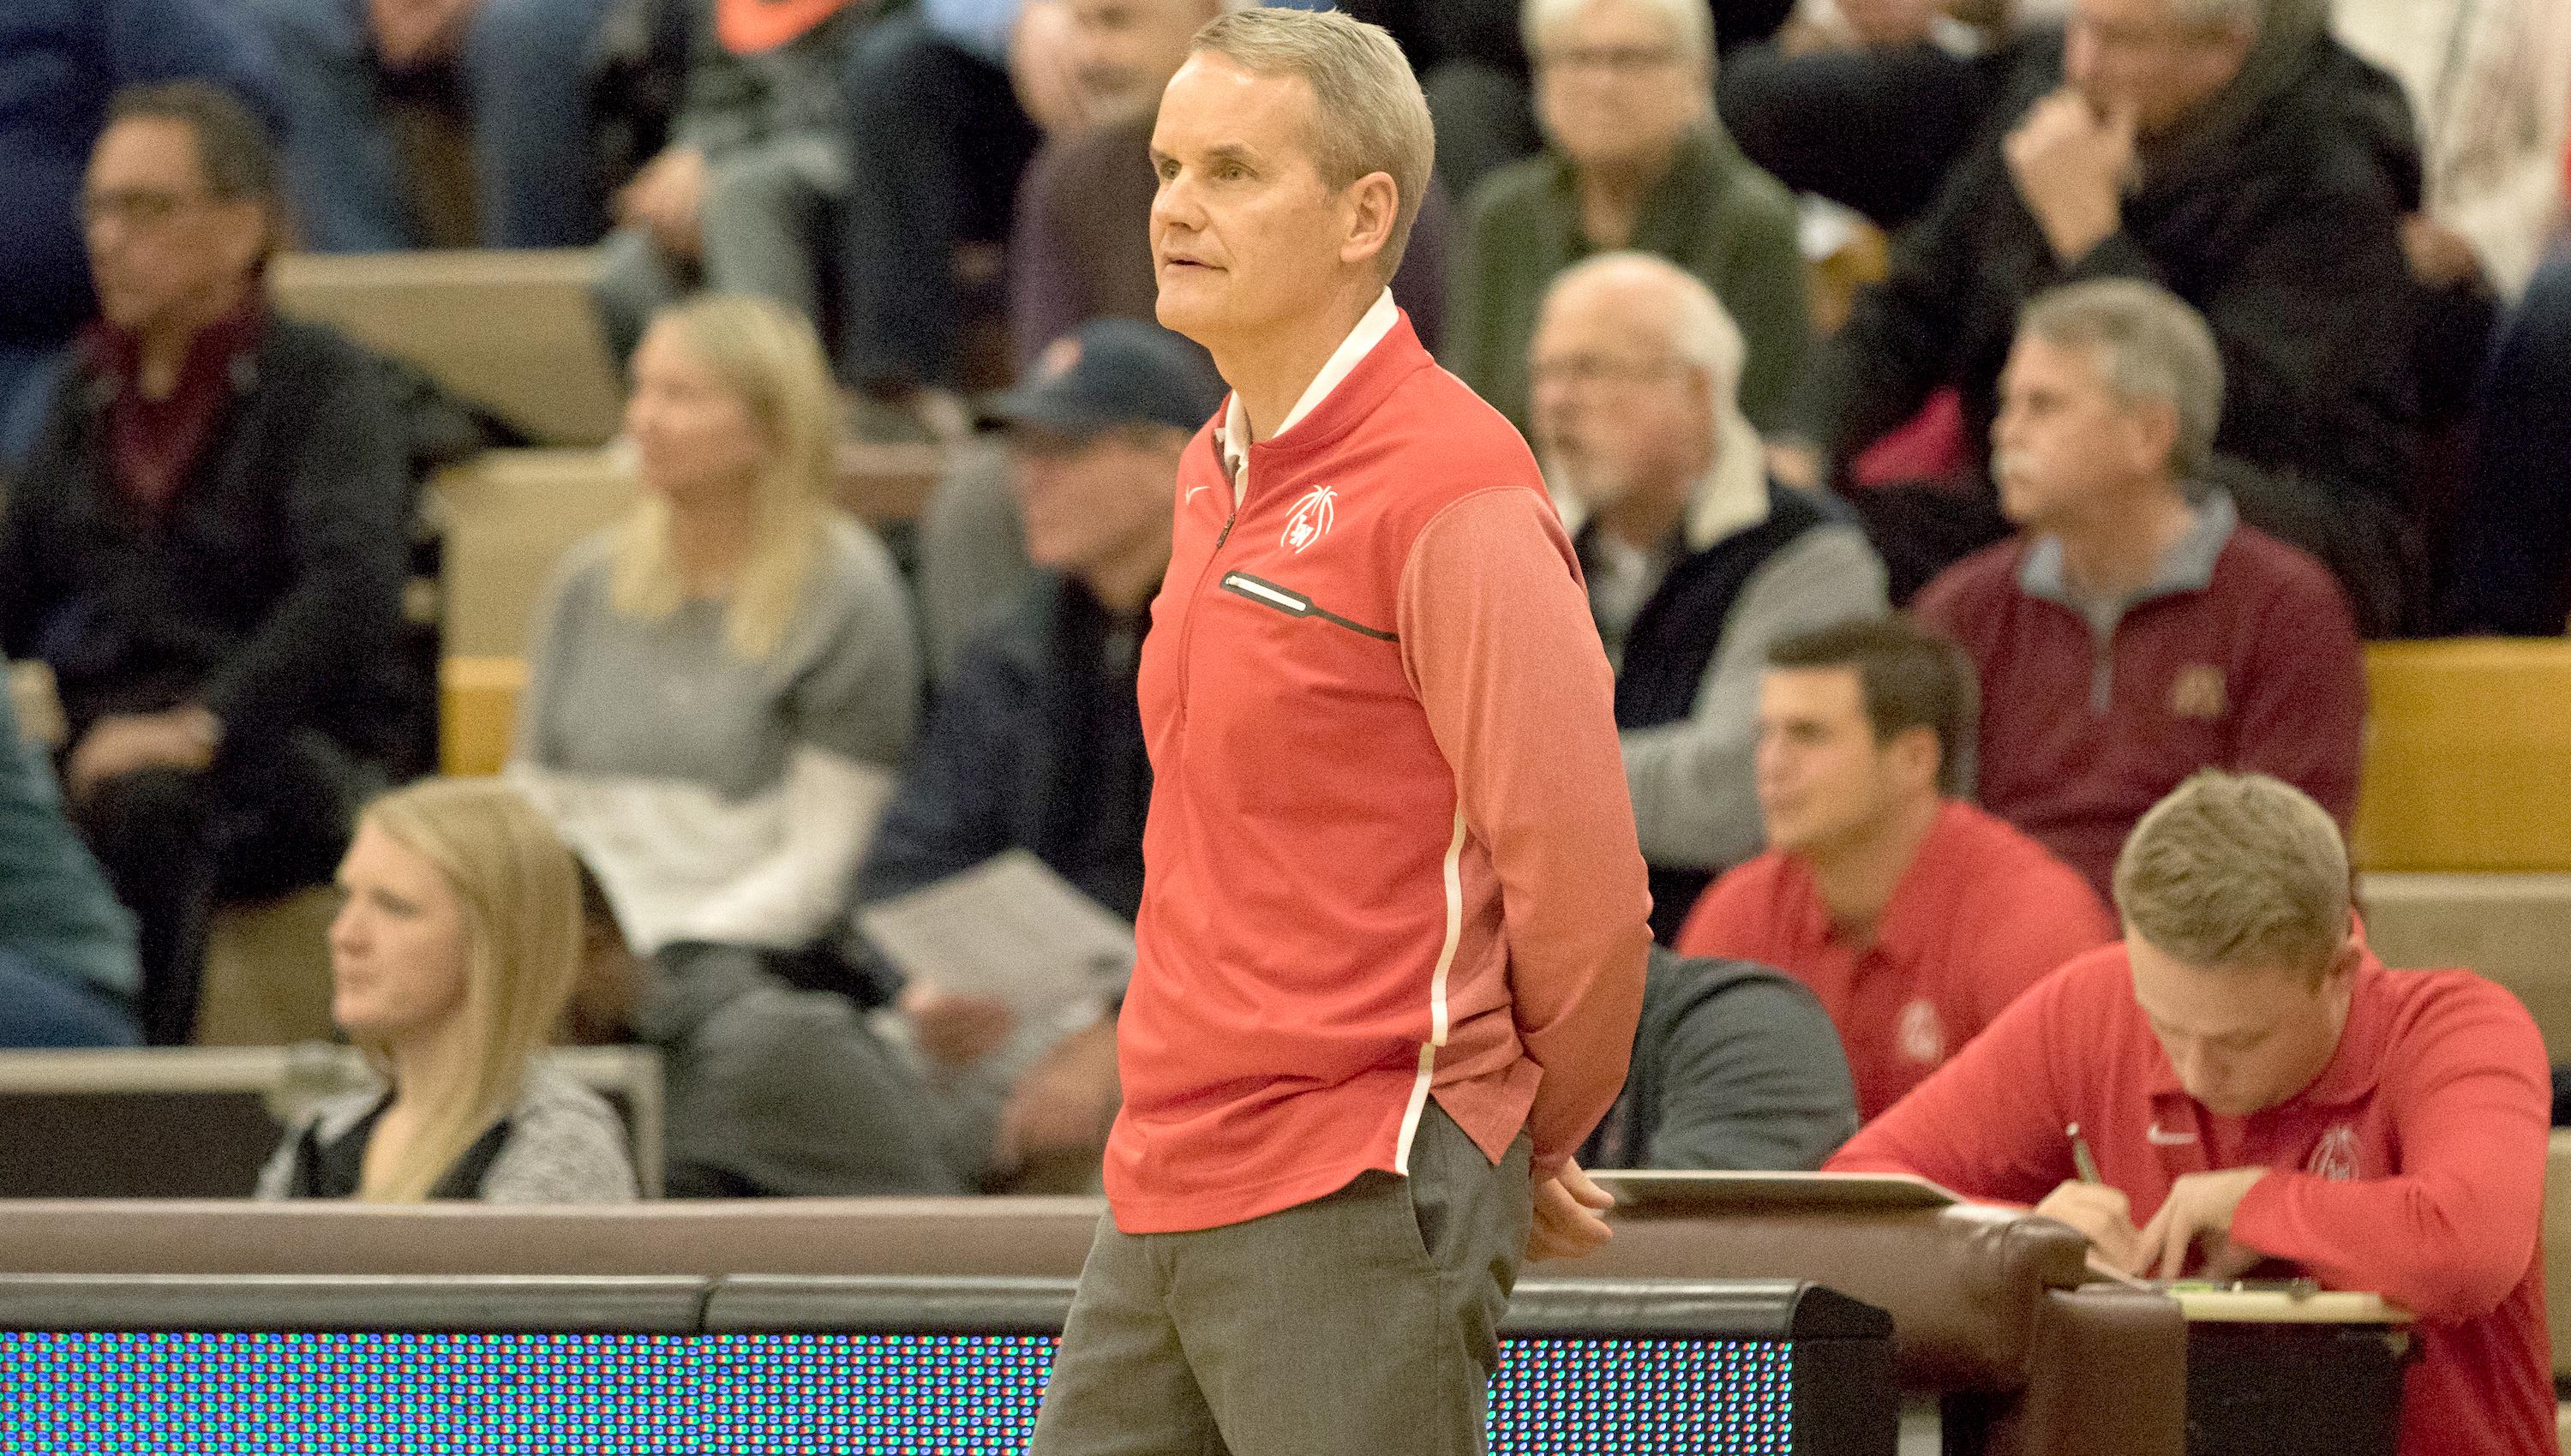 Lakeville North coach John Oxton and the Panthers look to end Apple Valley's reign as the kings of the South Suburban Conference and show they are a t